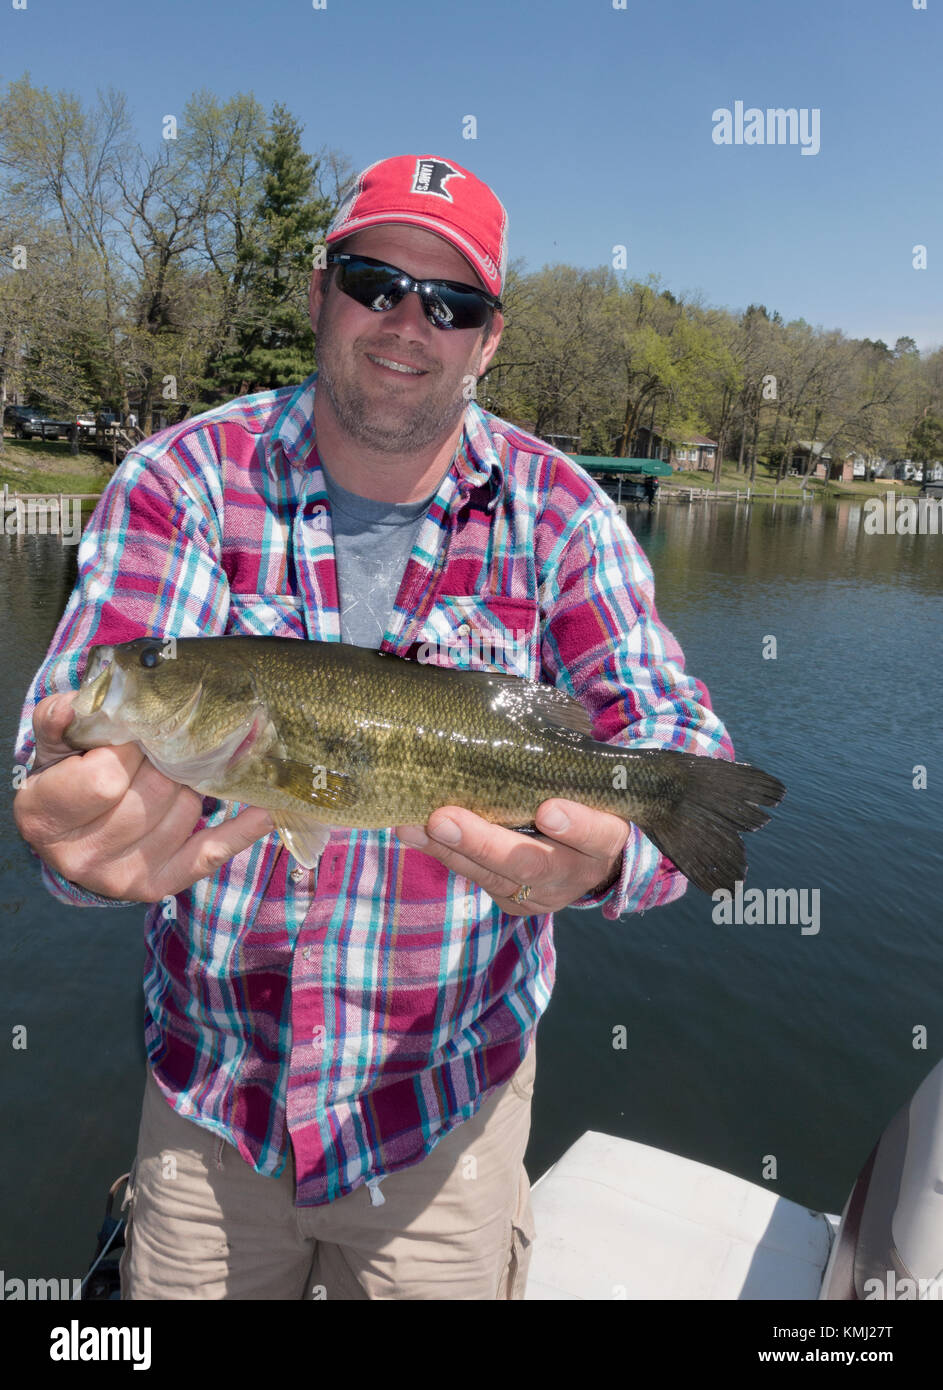 Angler holds up a nice size bass. Caught while fishing on the Gull chain of lakes. Nisswa Minnesota MN USA Stock Photo